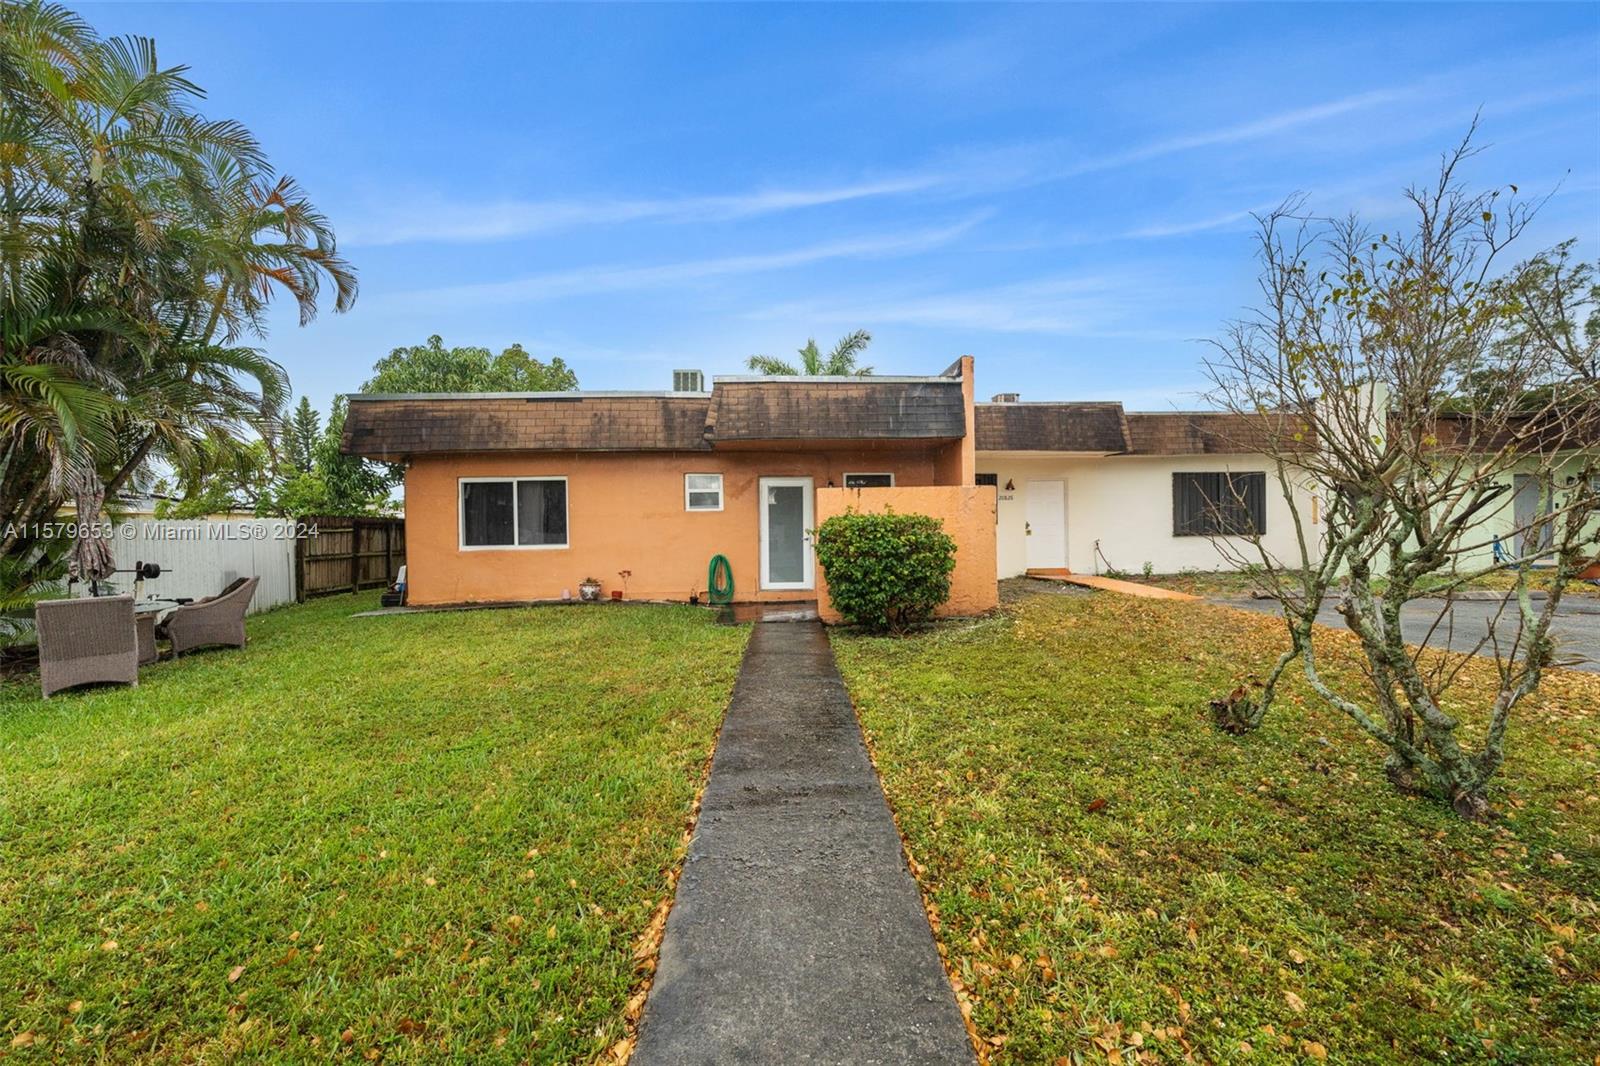 Property for Sale at 20822 Nw 24th Ct Ct 20822, Miami Gardens, Broward County, Florida - Bedrooms: 3 
Bathrooms: 2  - $325,000